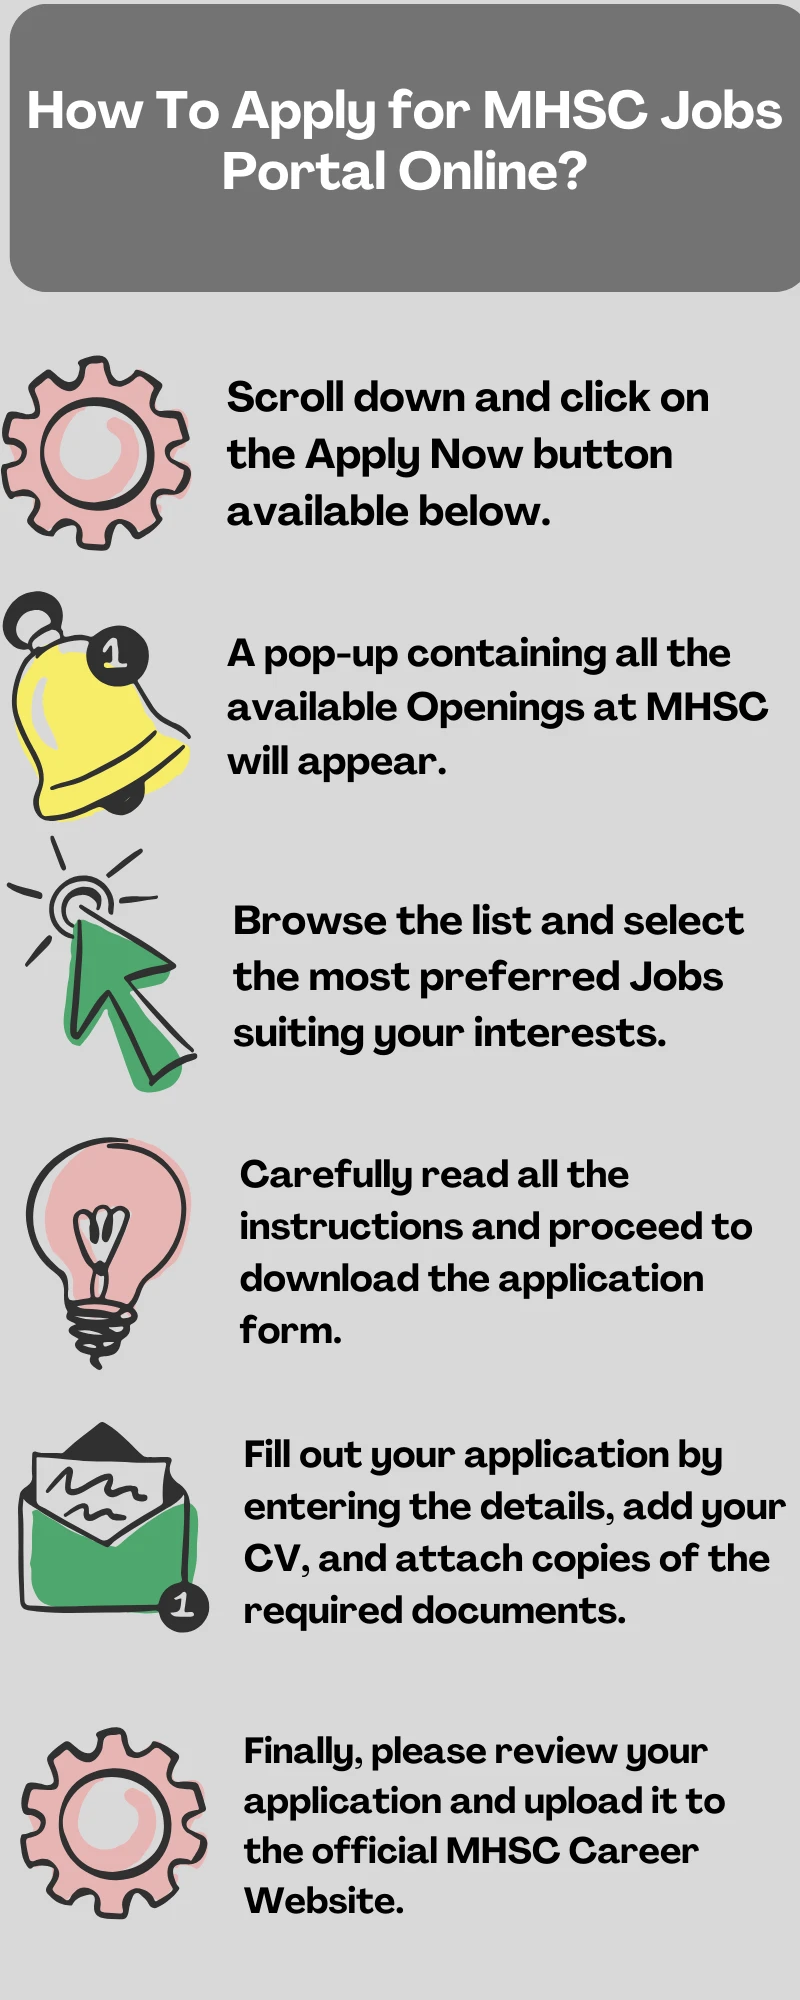 How To Apply for MHSC Jobs Portal Online?